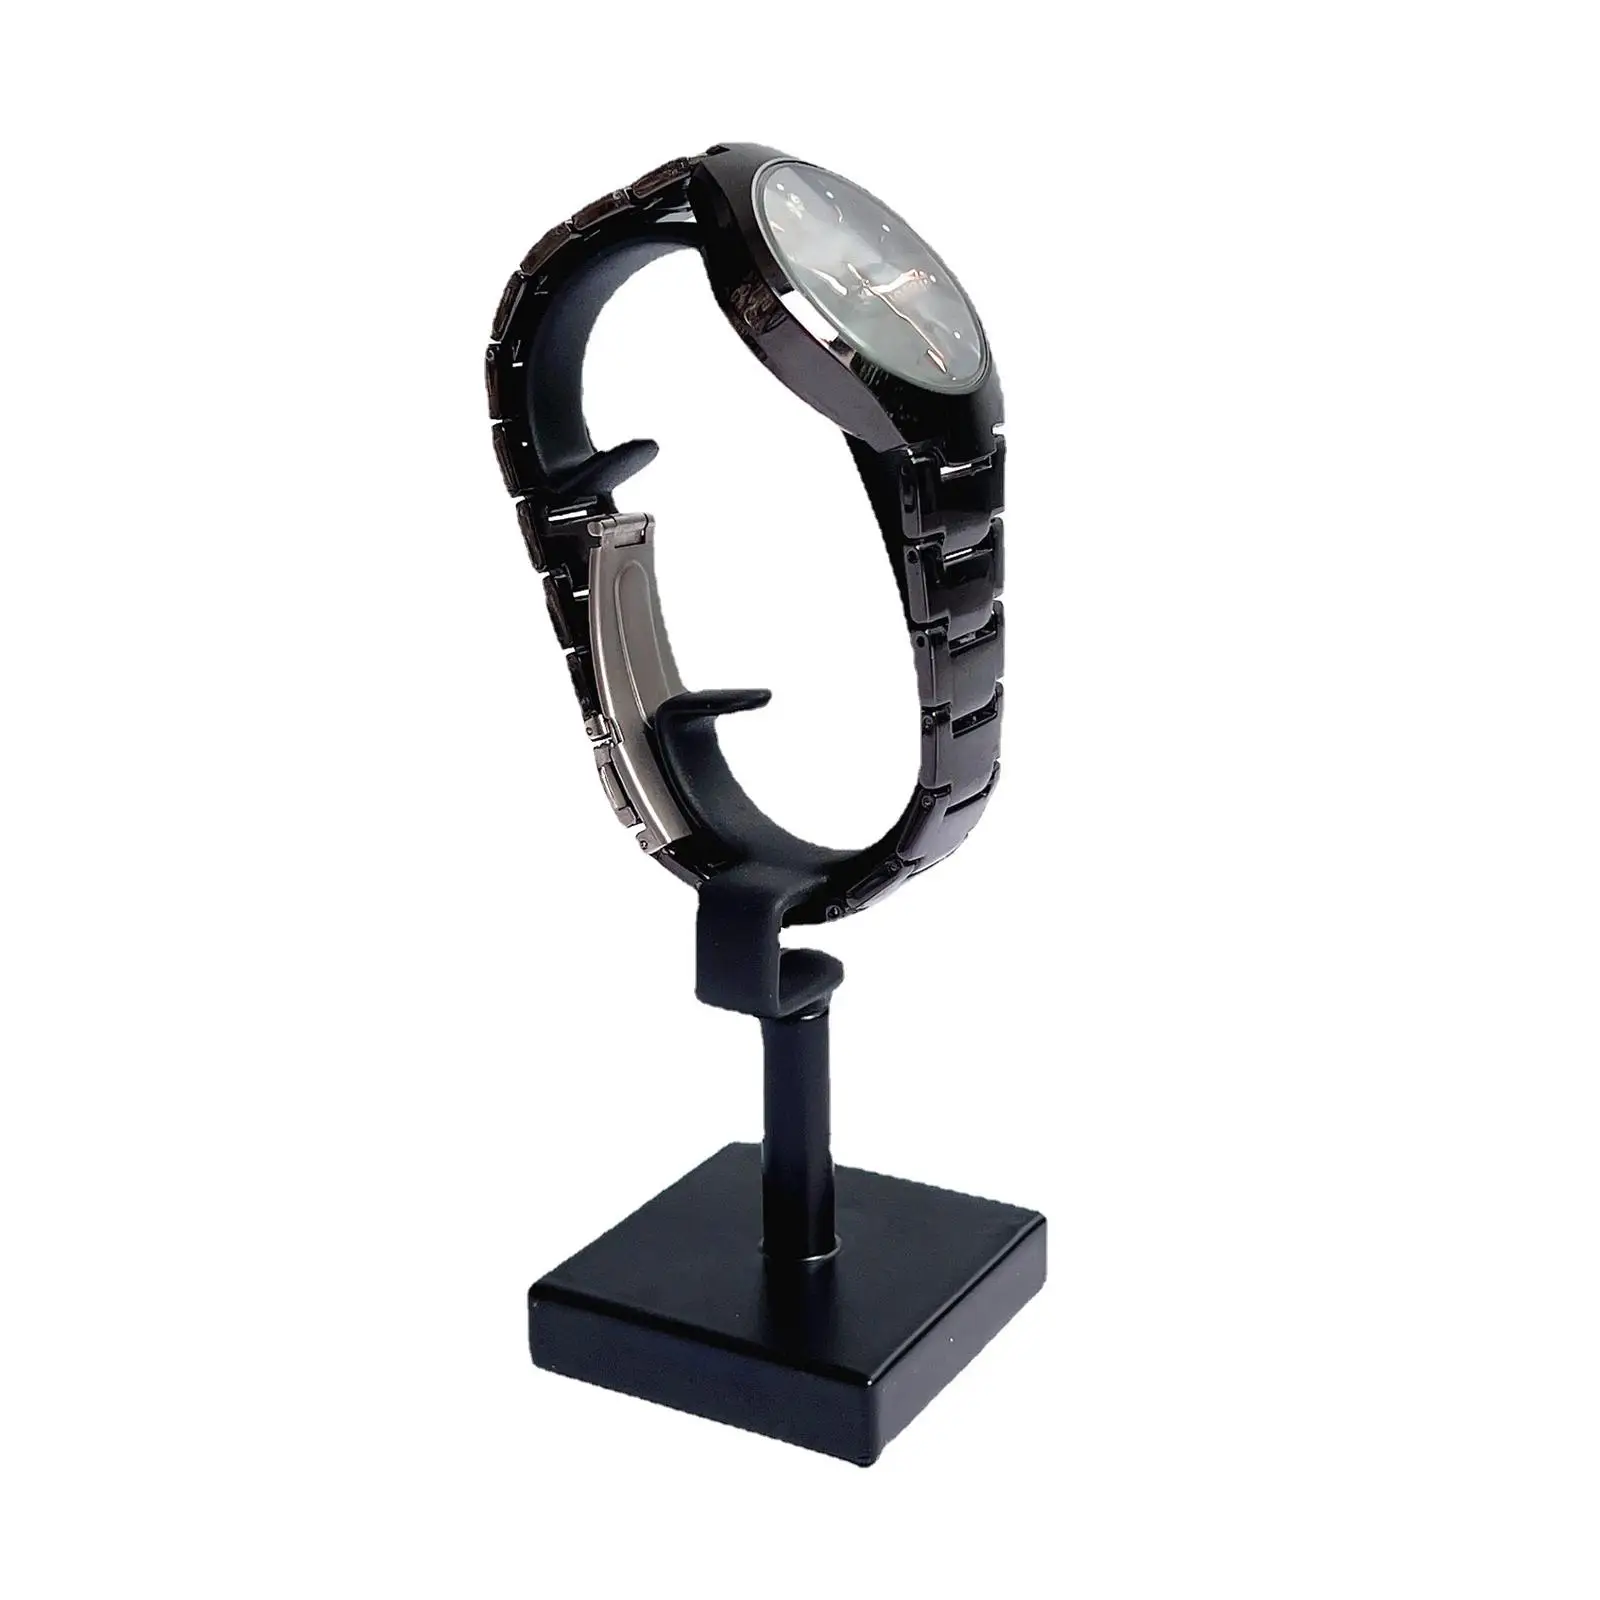 Durable Watch Display Stand Home Decor Ornament Jewelry Organizer Gift Bracelet Holder for Living Room Desktop Vanity Table Shop